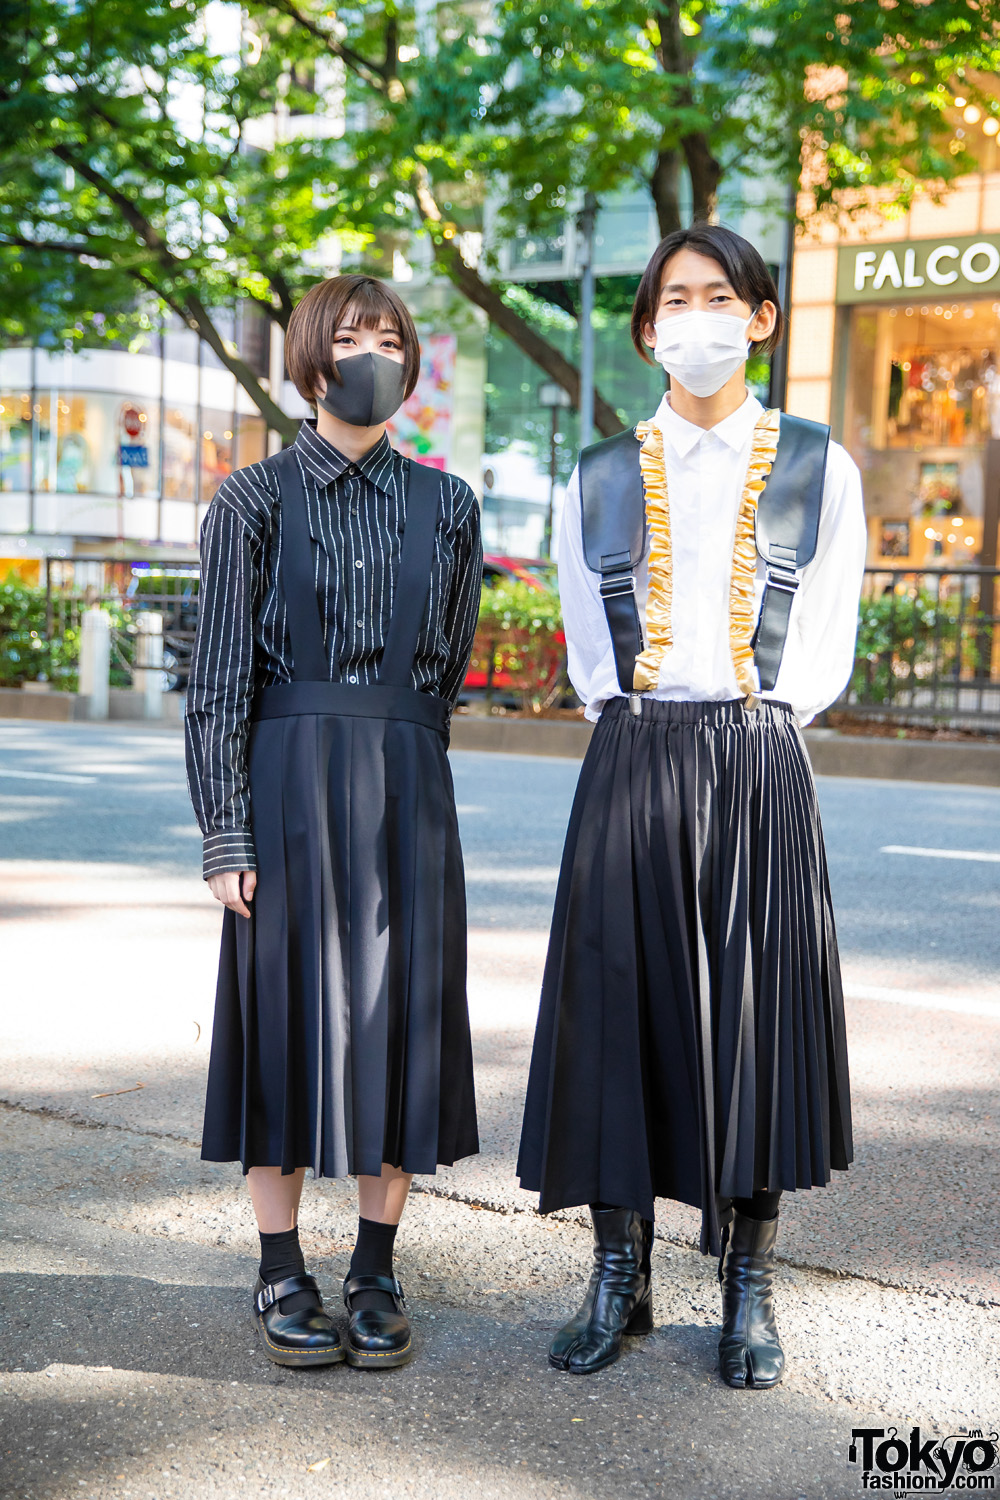 Students in Coordinated Monochrome Fashion w/ Comme Des Garcons Pleated Skirts, Long Sleeve Shirts & Black Leather Shoes